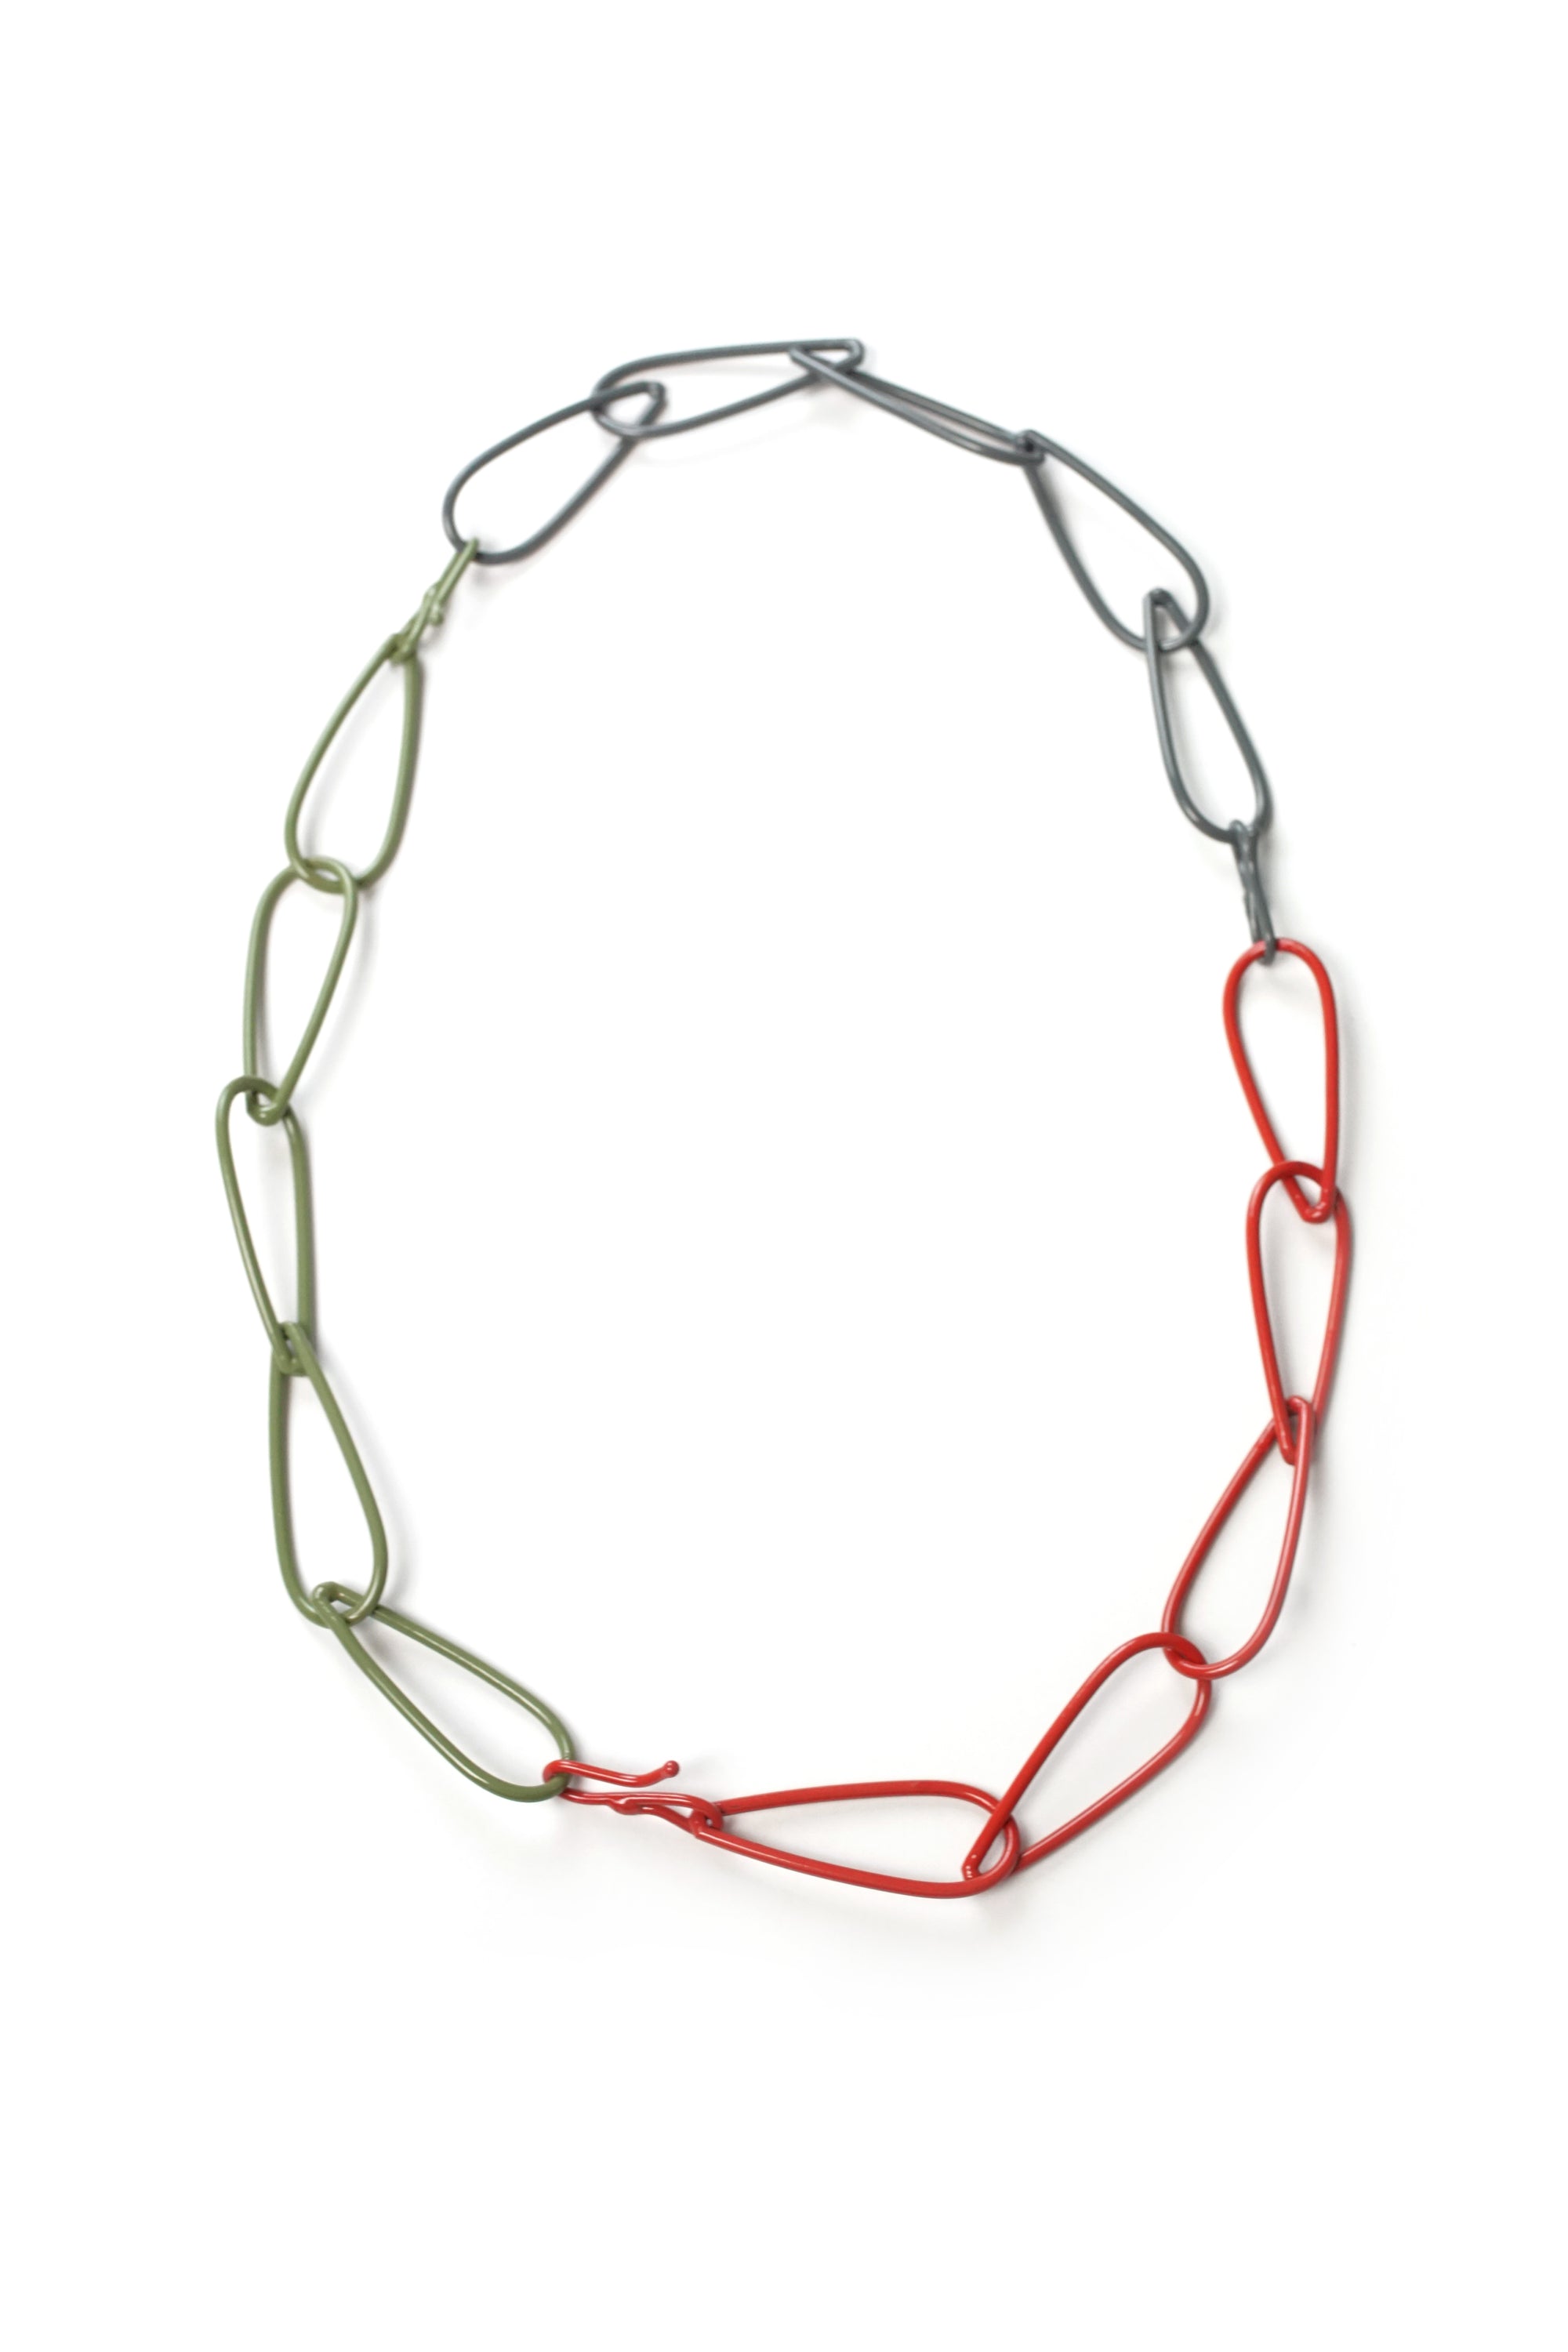 Modular Necklace in Coral Red, Storm Grey, and Olive Green